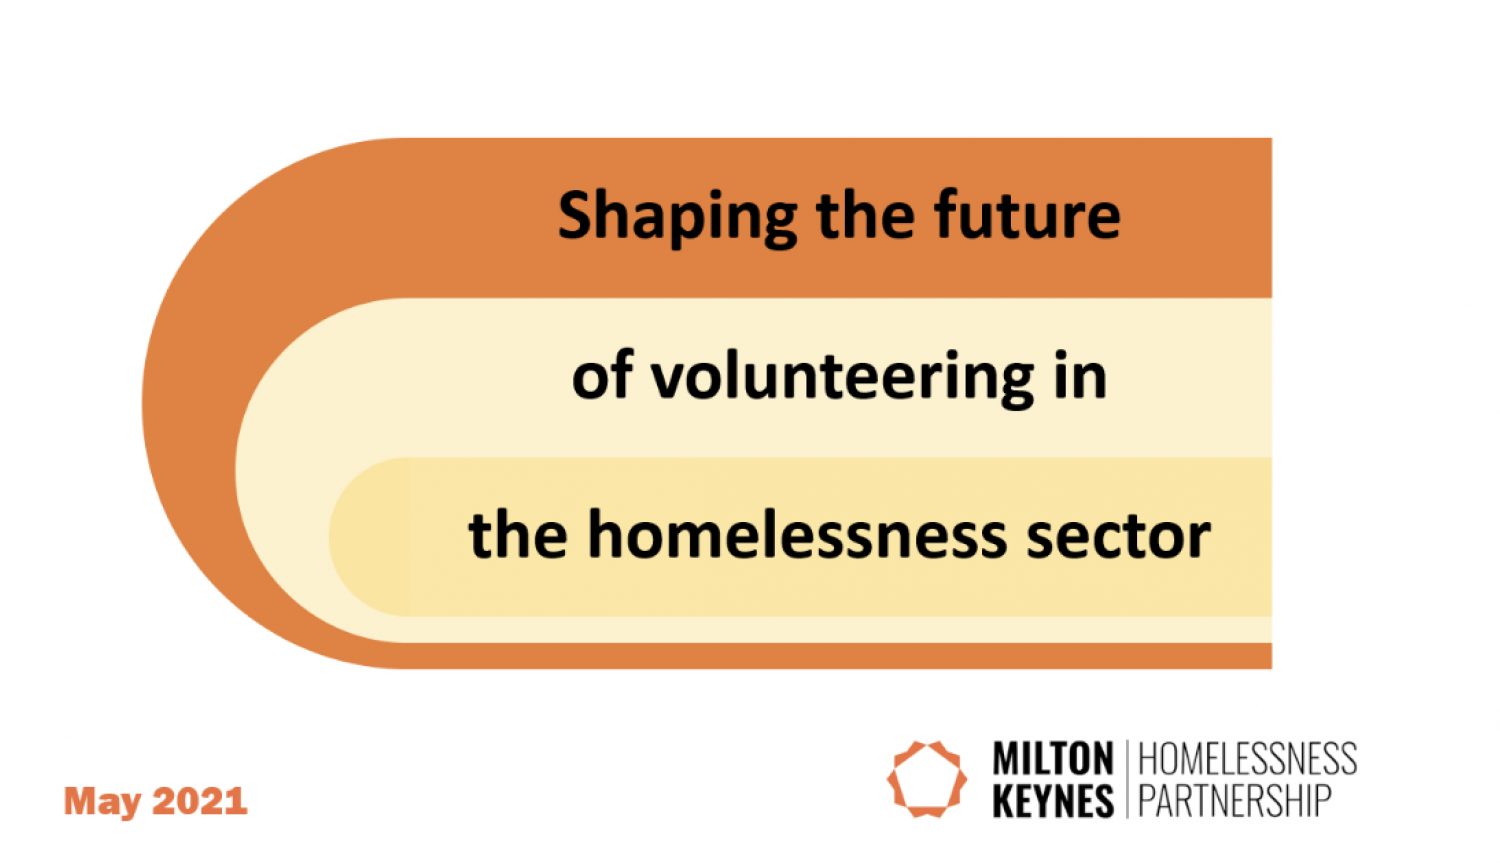 MKHP MKHP publish report: ‘Shaping the future of volunteering in the homelessness sector’